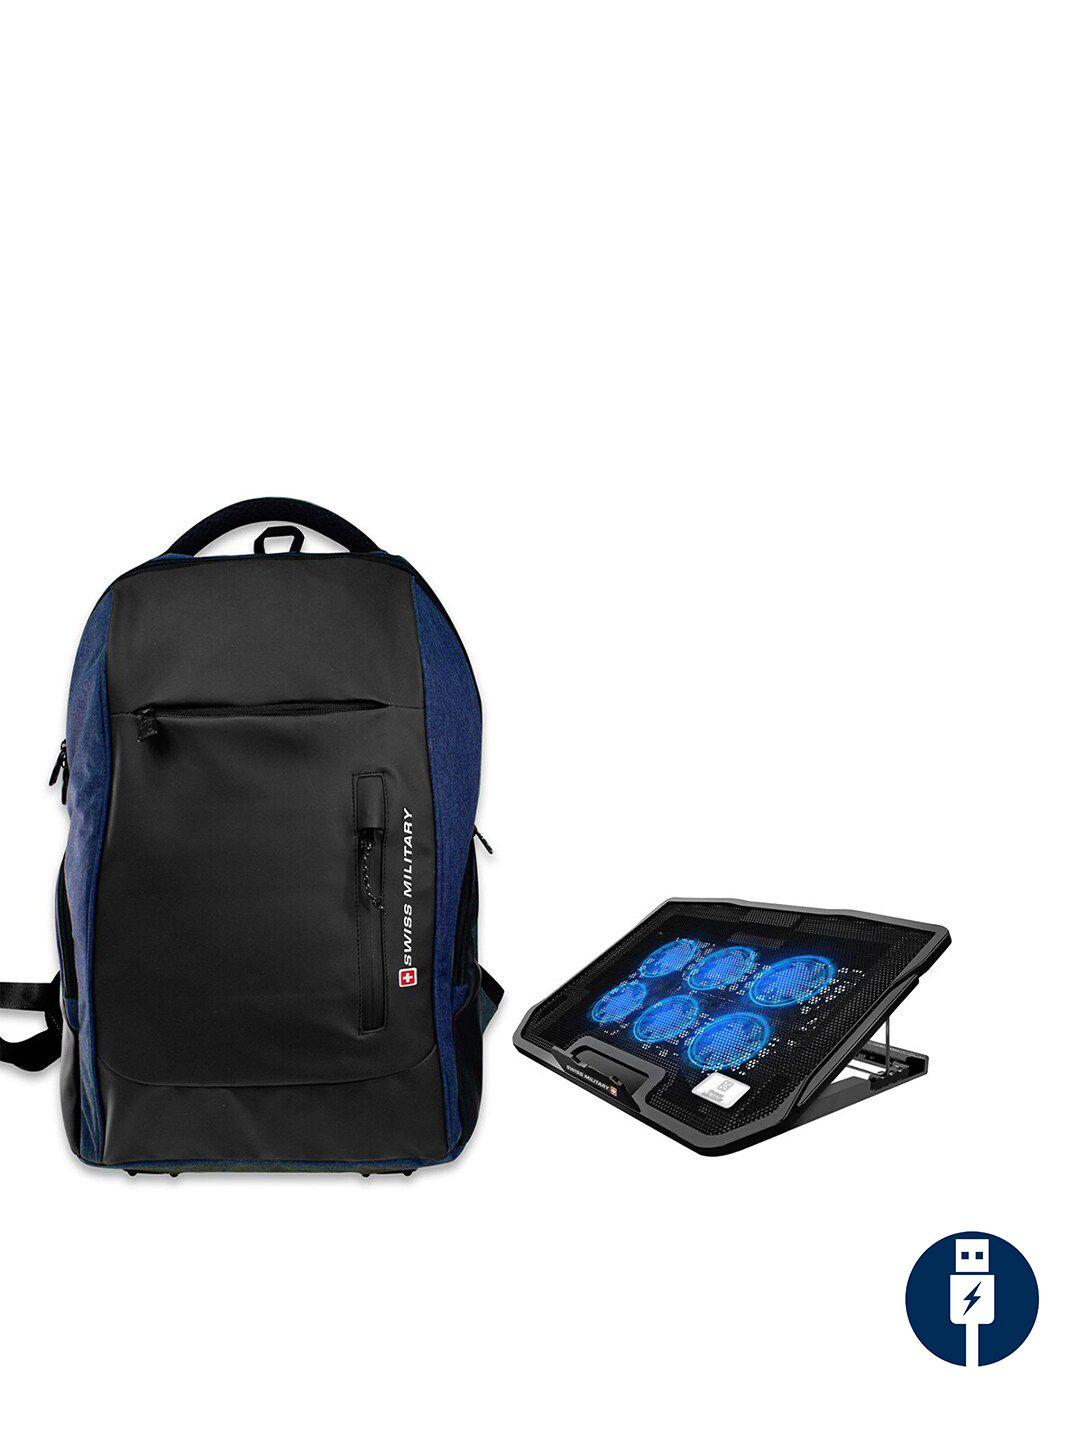 swiss military unisex blue brand logo backpack with usb charging port